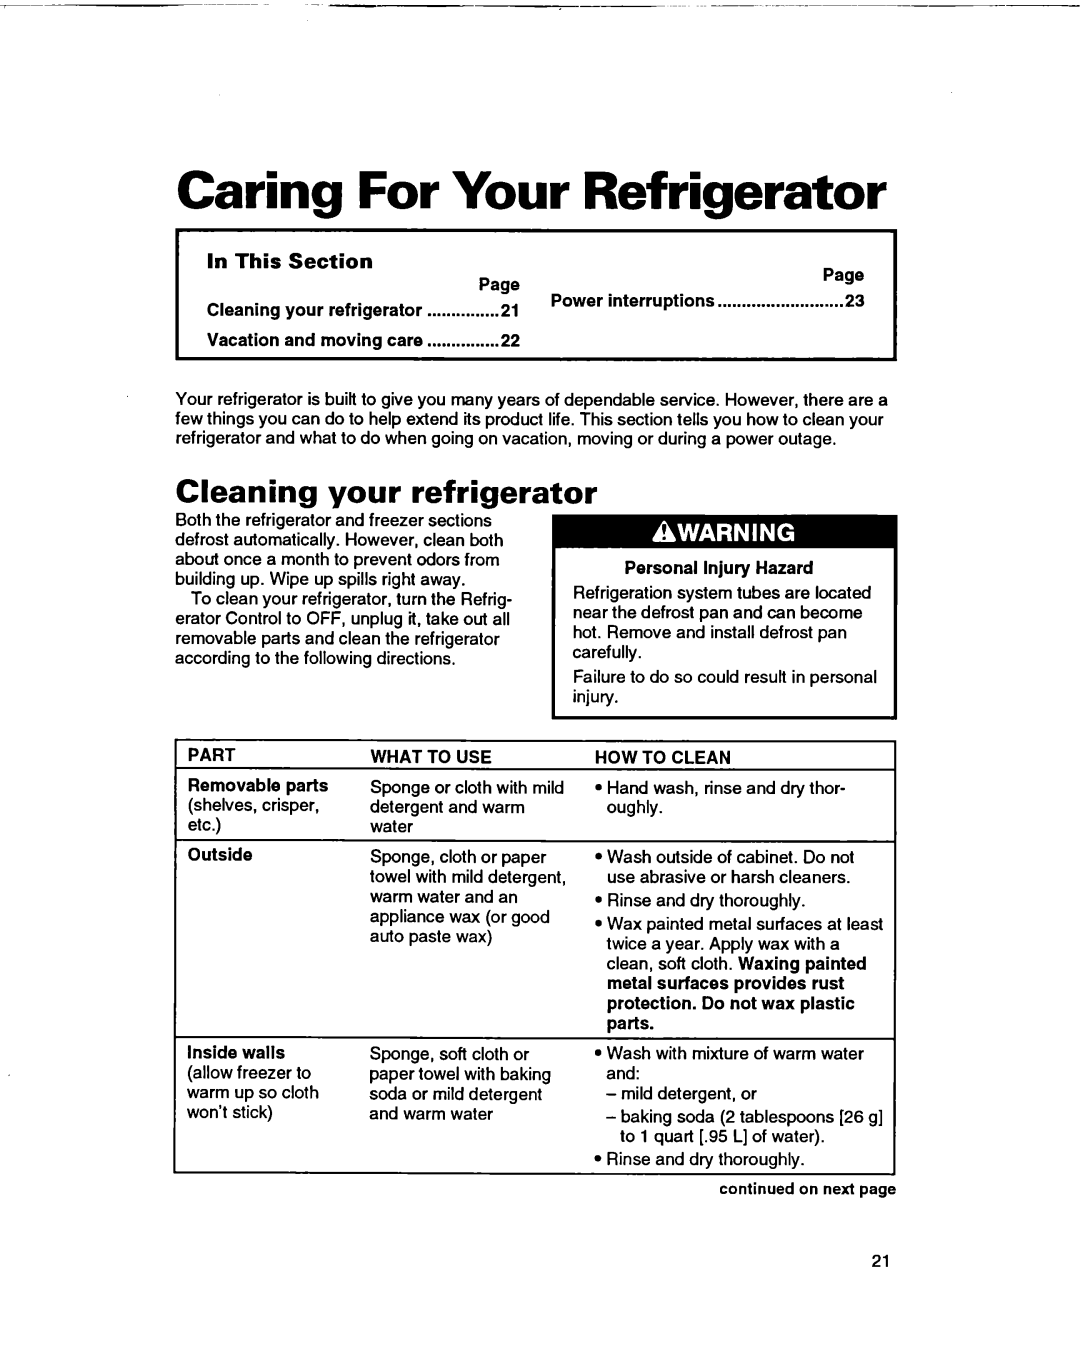 Whirlpool ED22DF warranty Caring For Your Refrigerator, Cleaning your refrigerator, In This, Section 